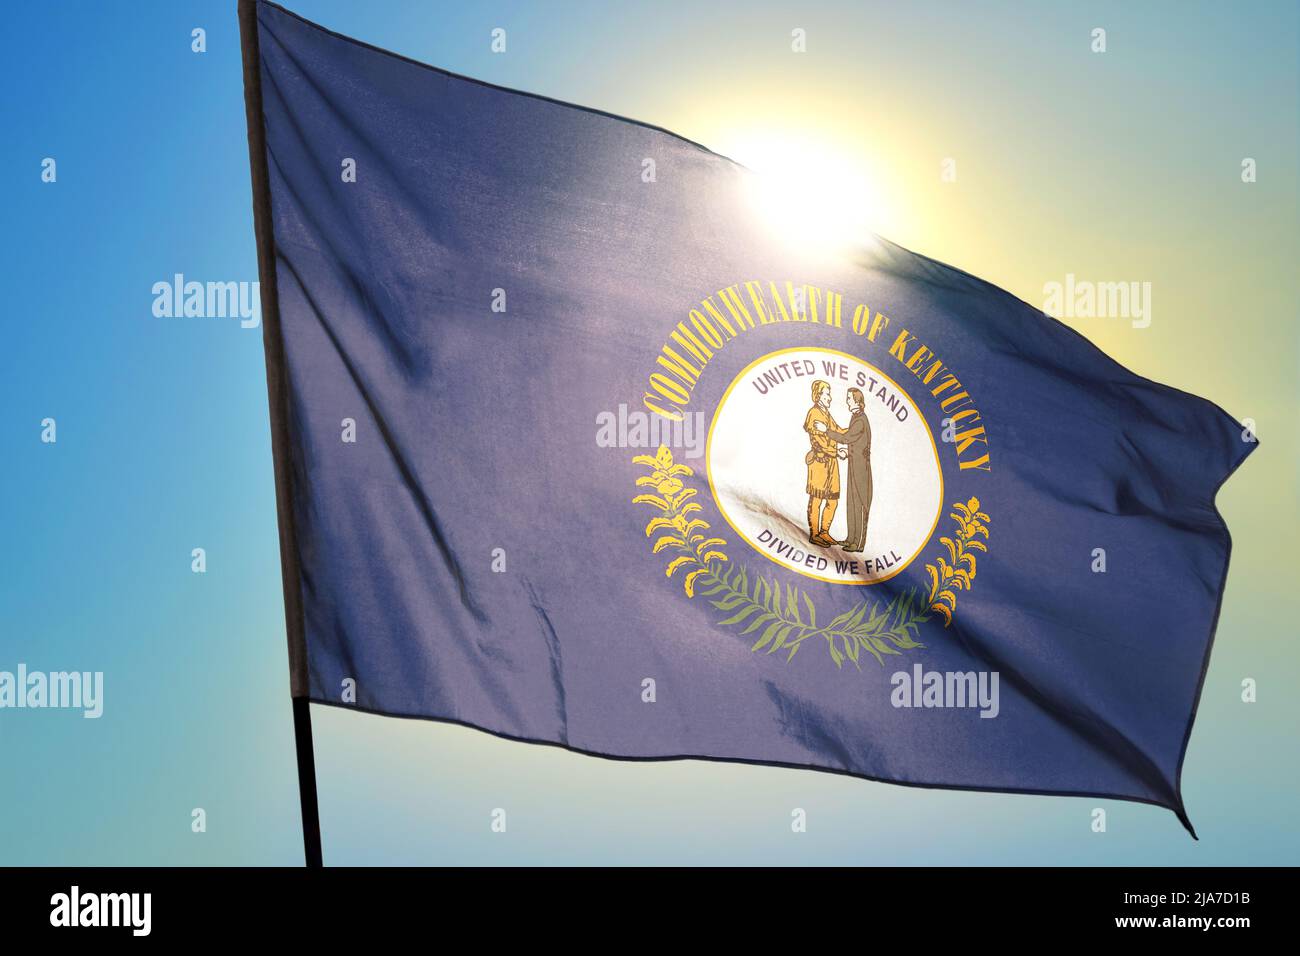 Kentucky state of United States flag waving on the wind Stock Photo